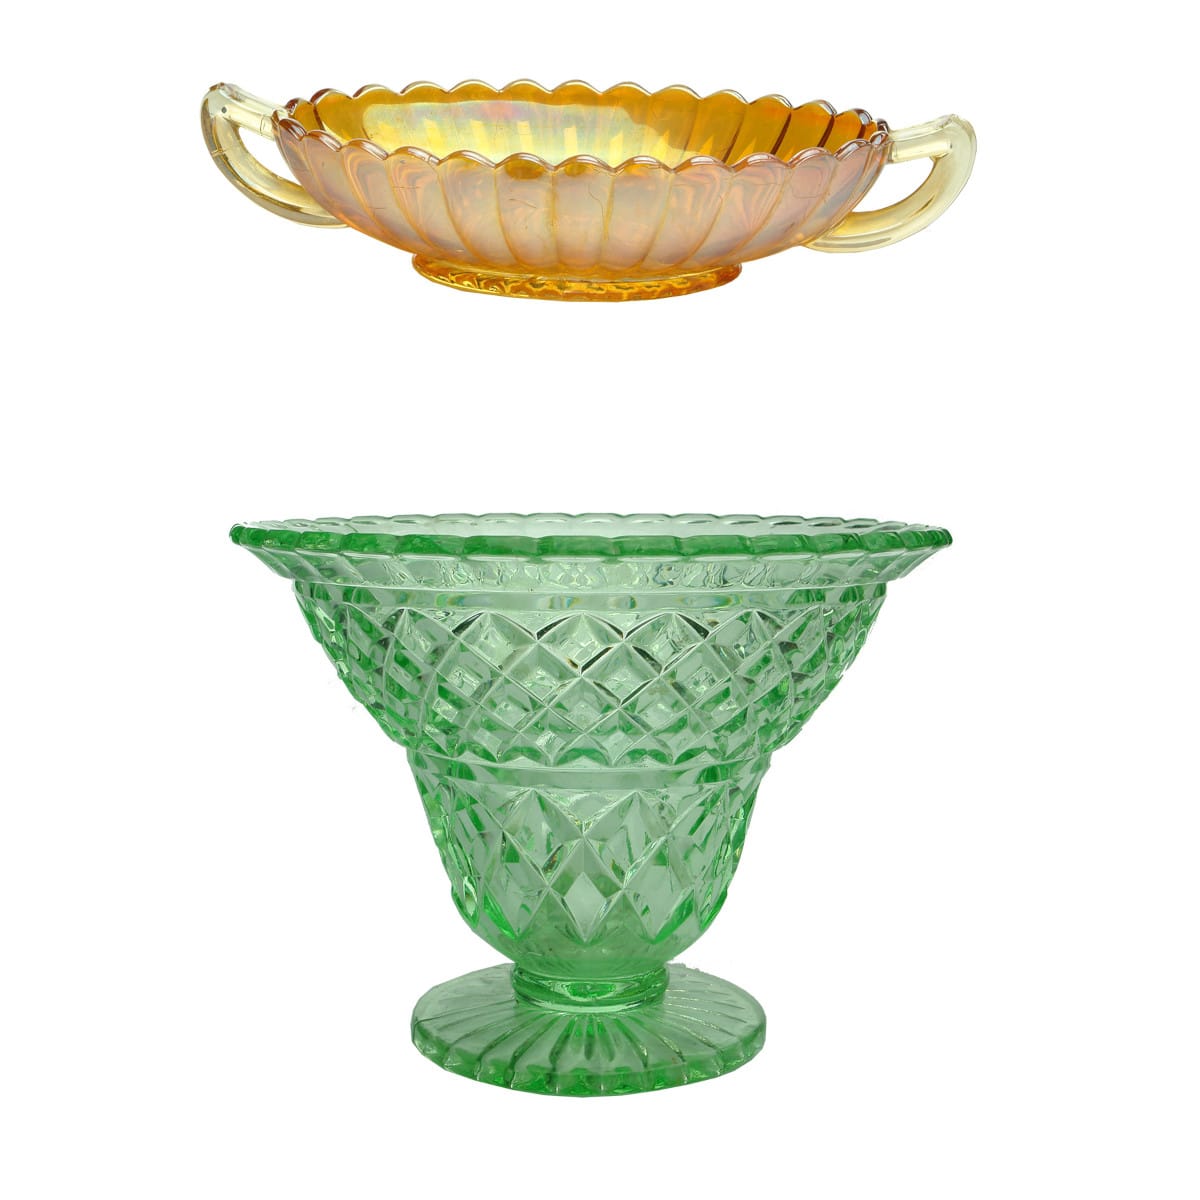 2 large glass bowls: Carnival Glass, Marigold Sweets Bowl and large facetted Depression glass bowl.